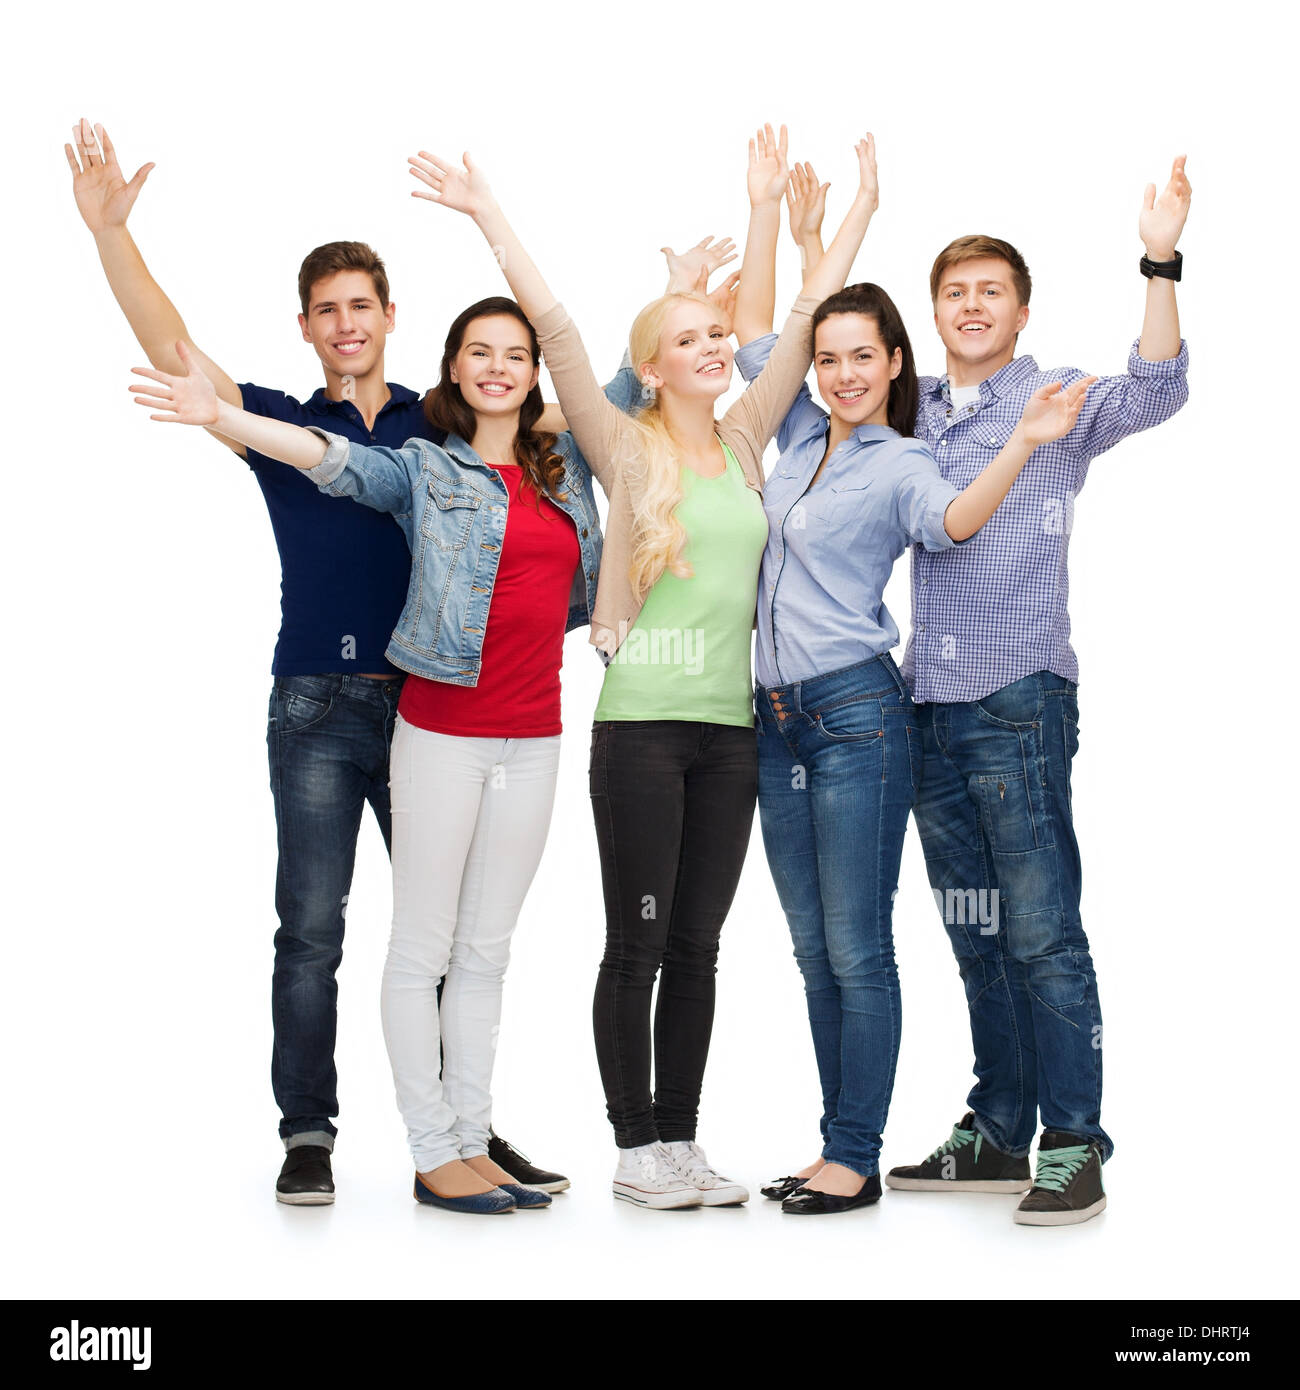 group of smiling students waving hands Stock Photo